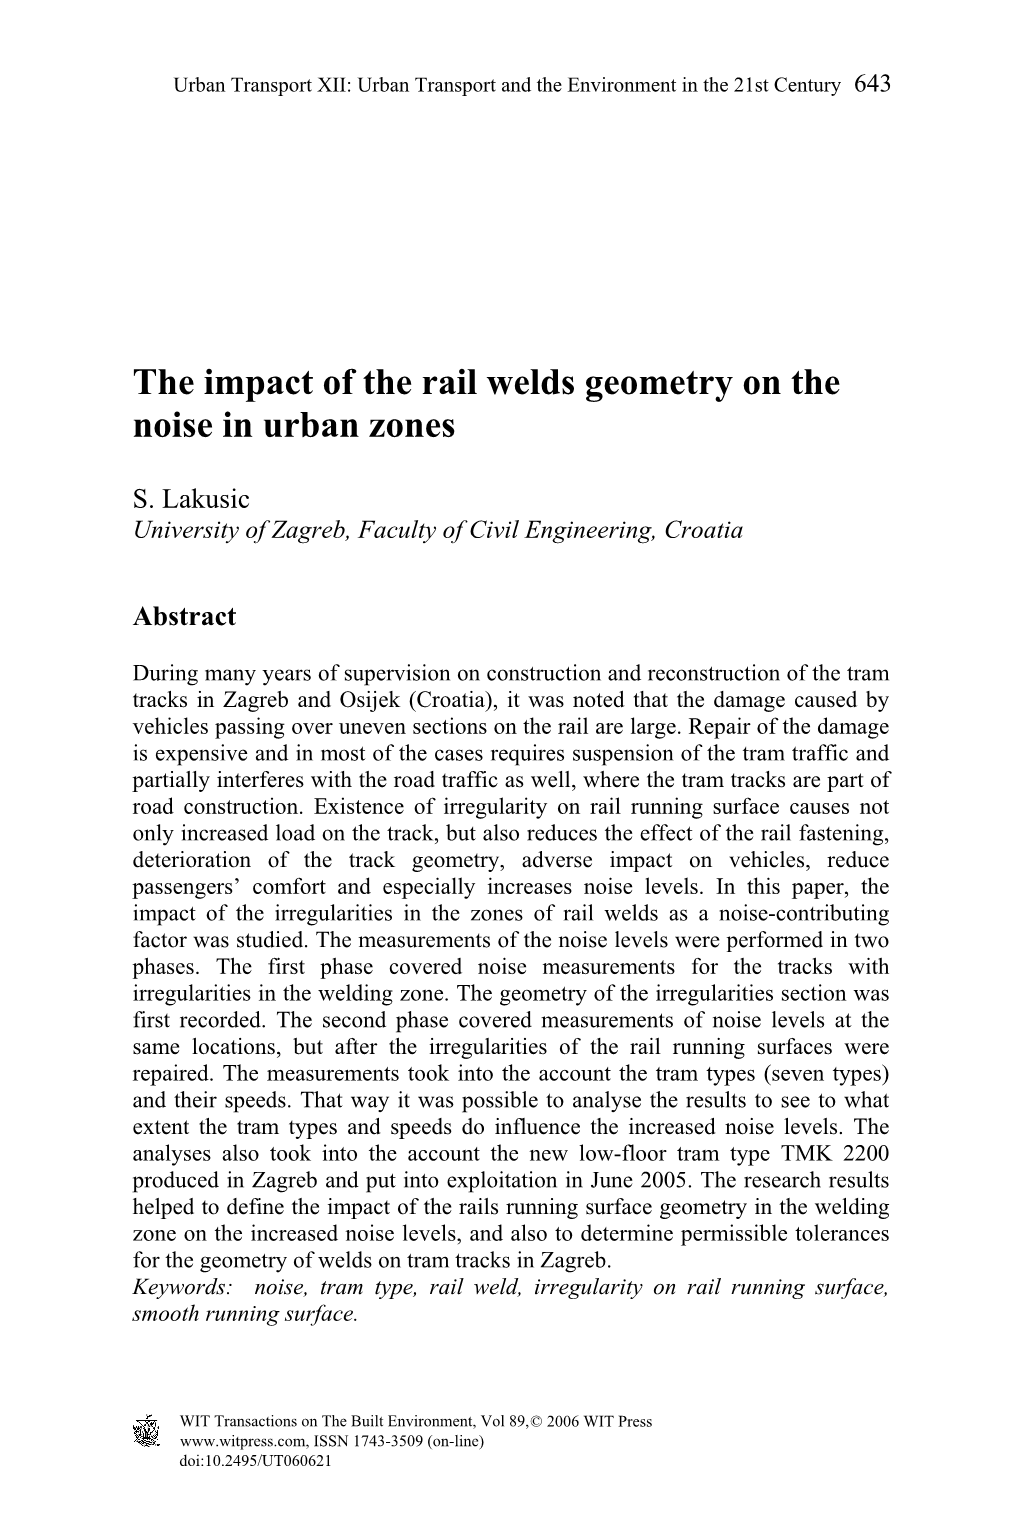 The Impact of the Rail Welds Geometry on the Noise in Urban Zones